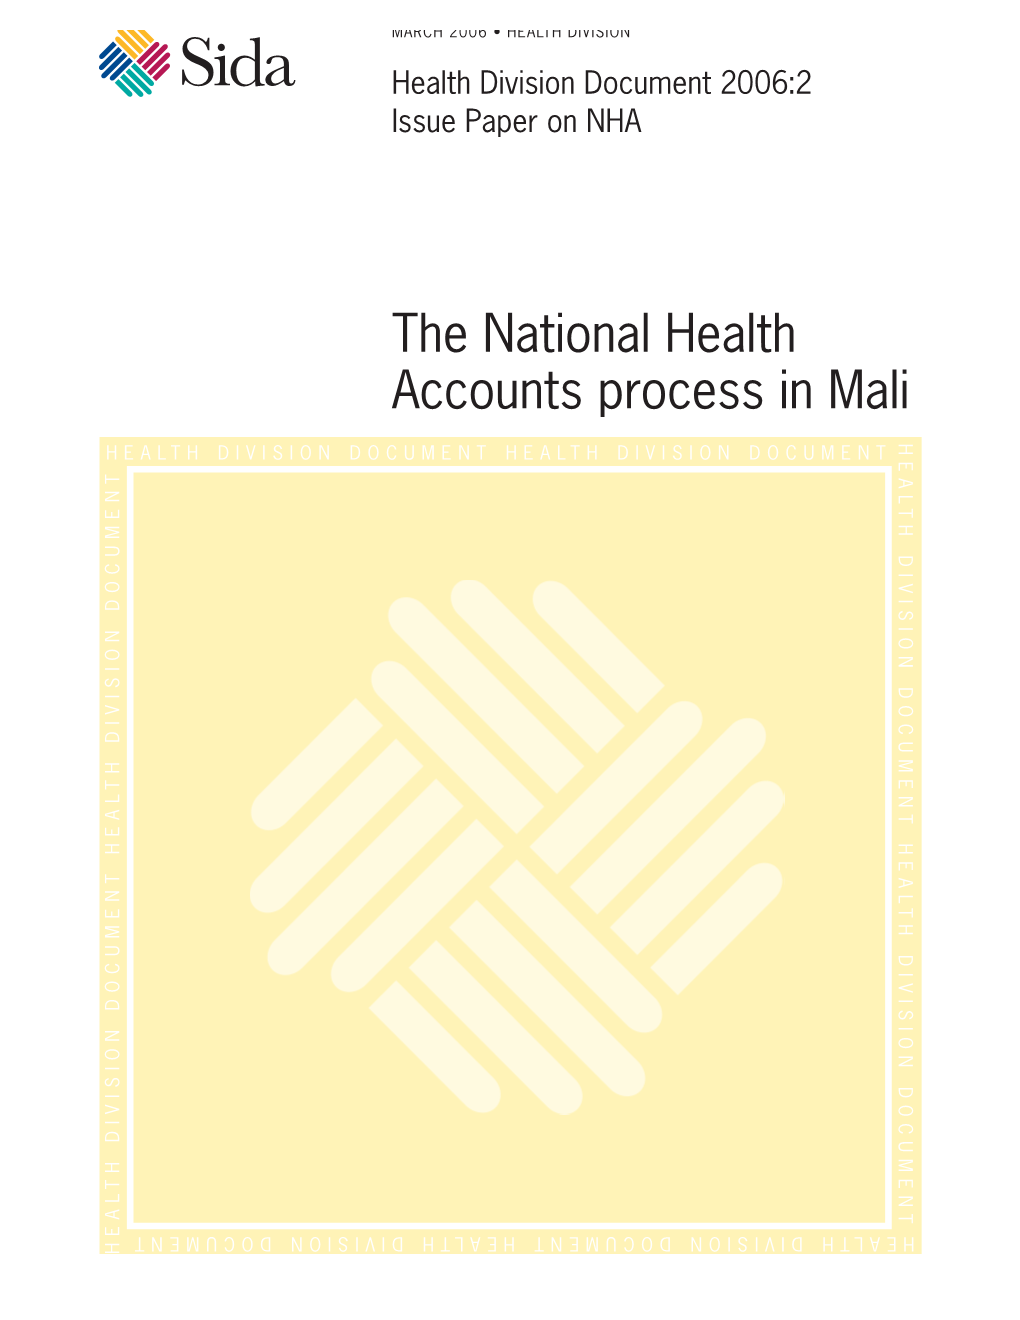 The National Health Accounts Process in Mali HEALTH DIVISION DOCUMENT HEALTH DIVISION DOCUMENT HEALTHDIVISION DOCUMENT HEALTH DIVISION